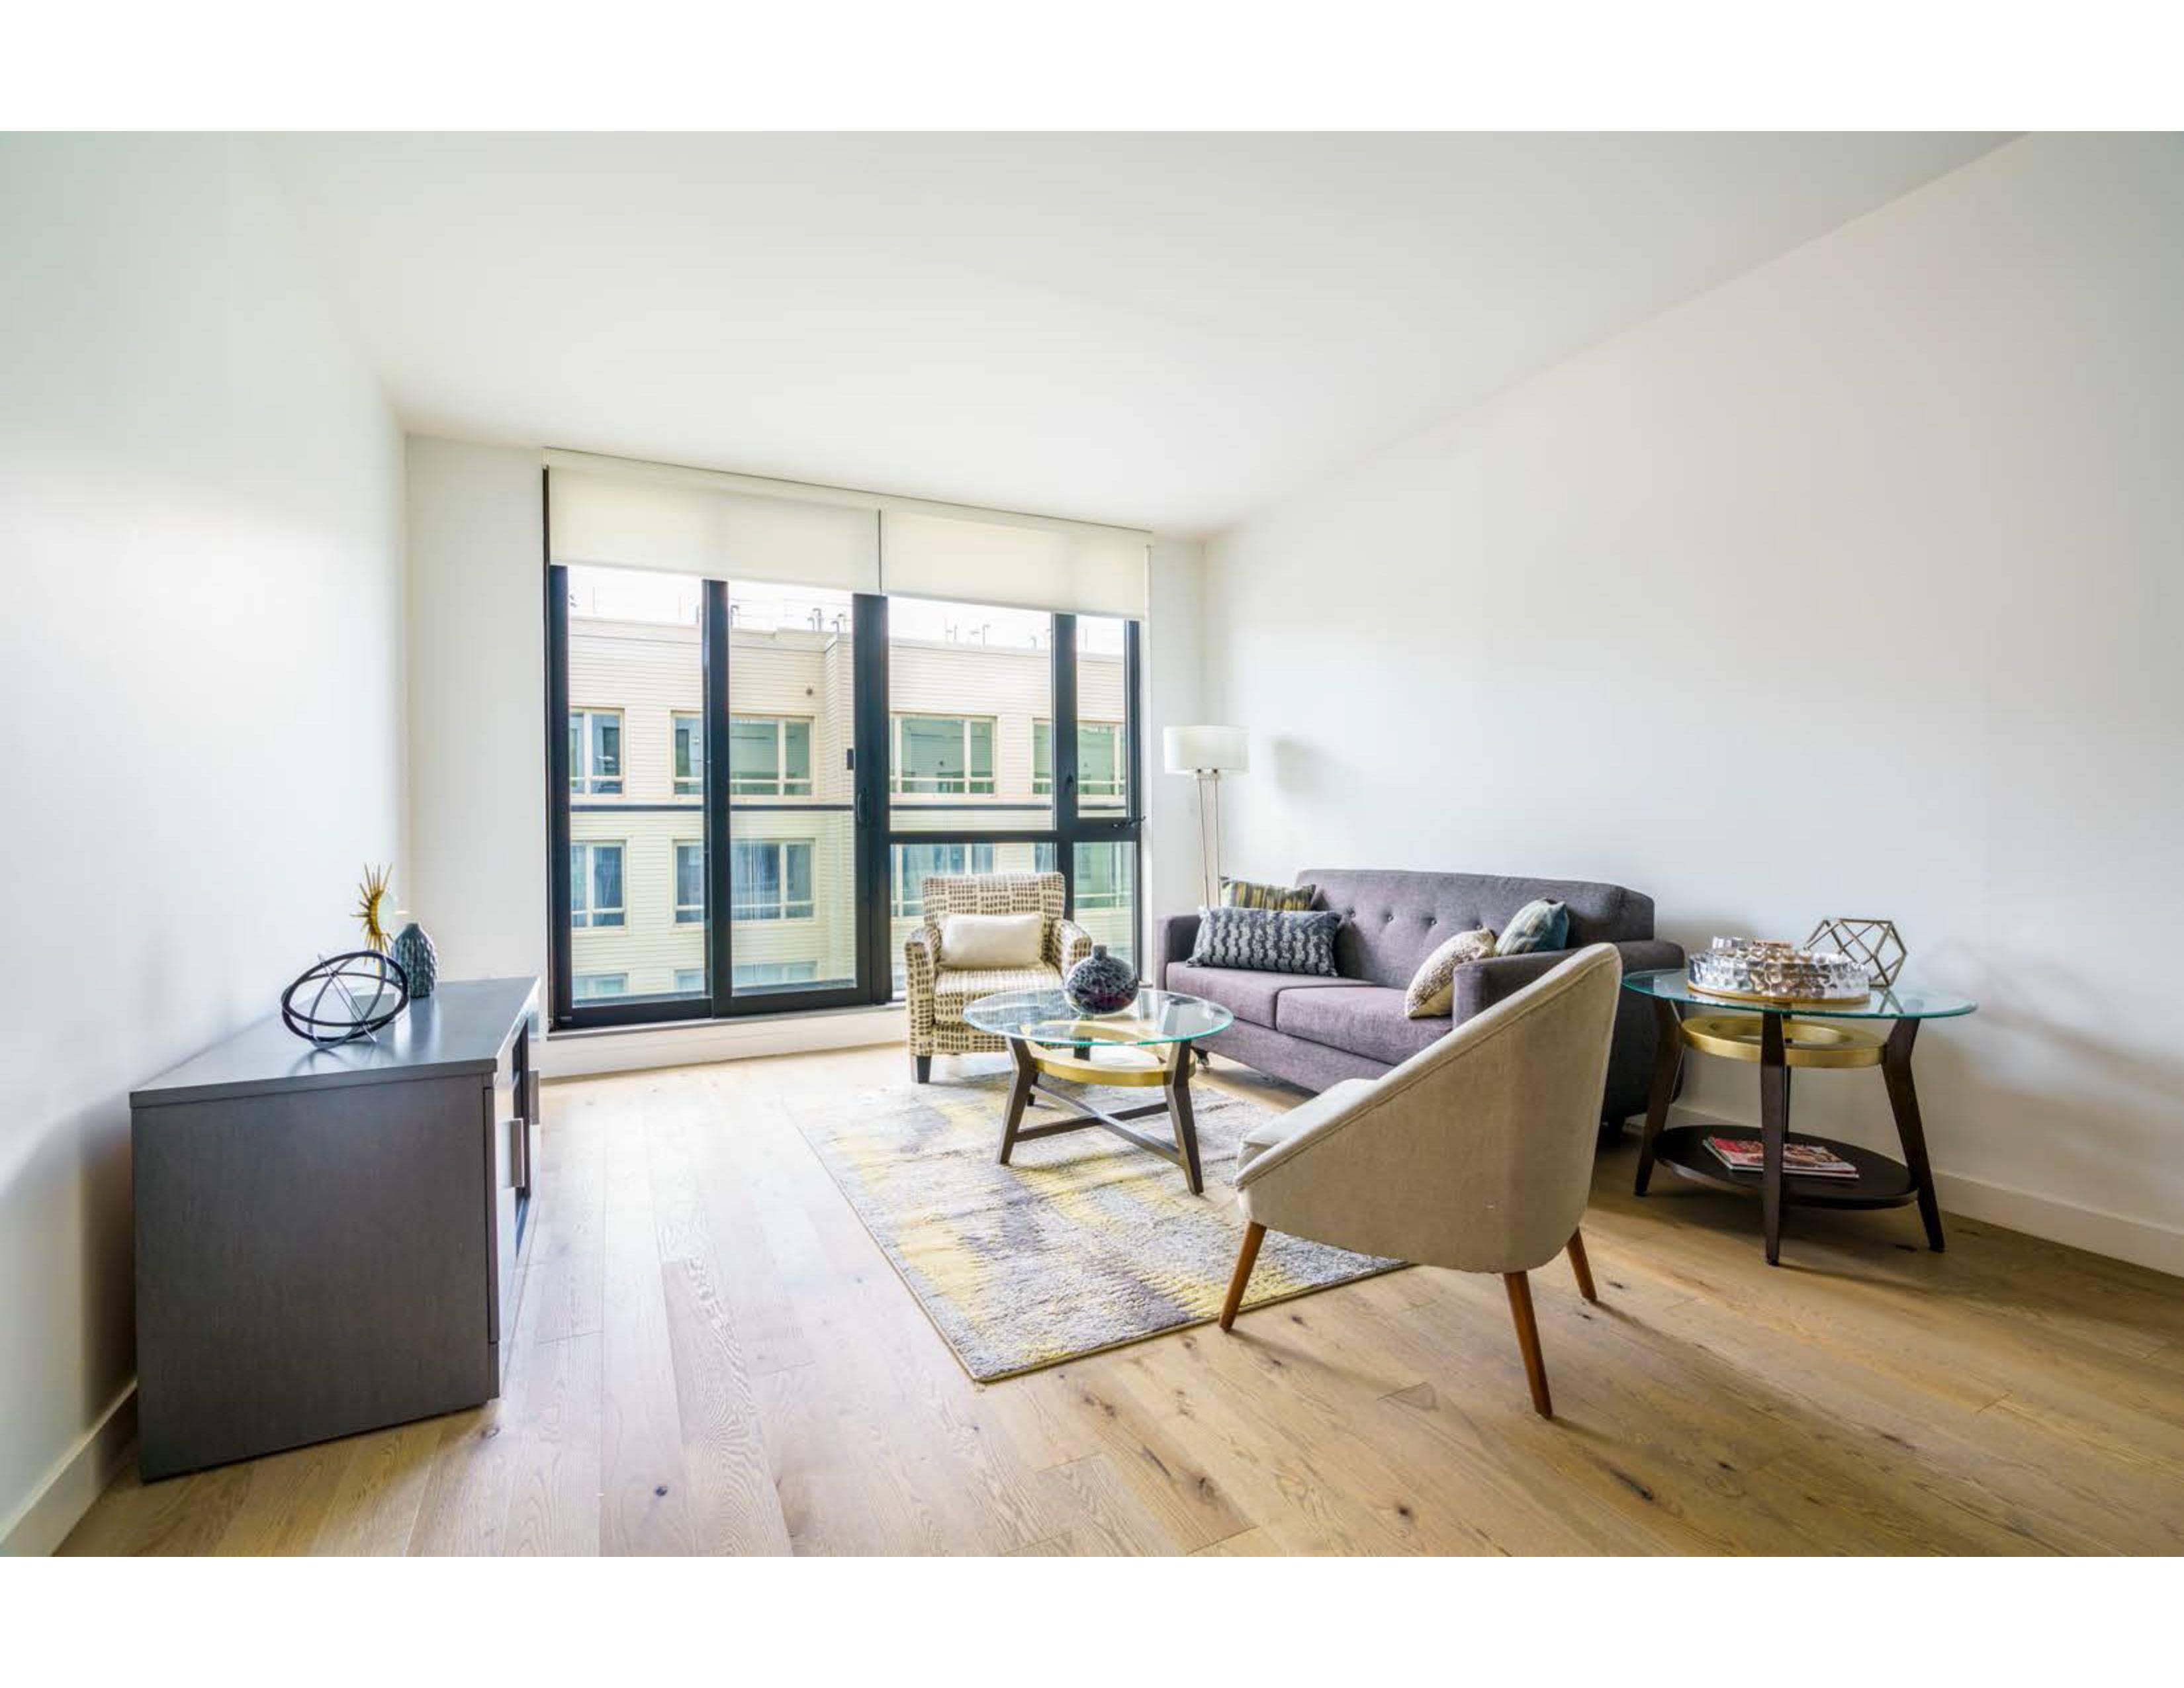 Click here for a VIRTUAL TOUR of this SOUTH FACING 2 BED 2 BATH with BALCONY at LIV MURRAY PARK SOUTH.